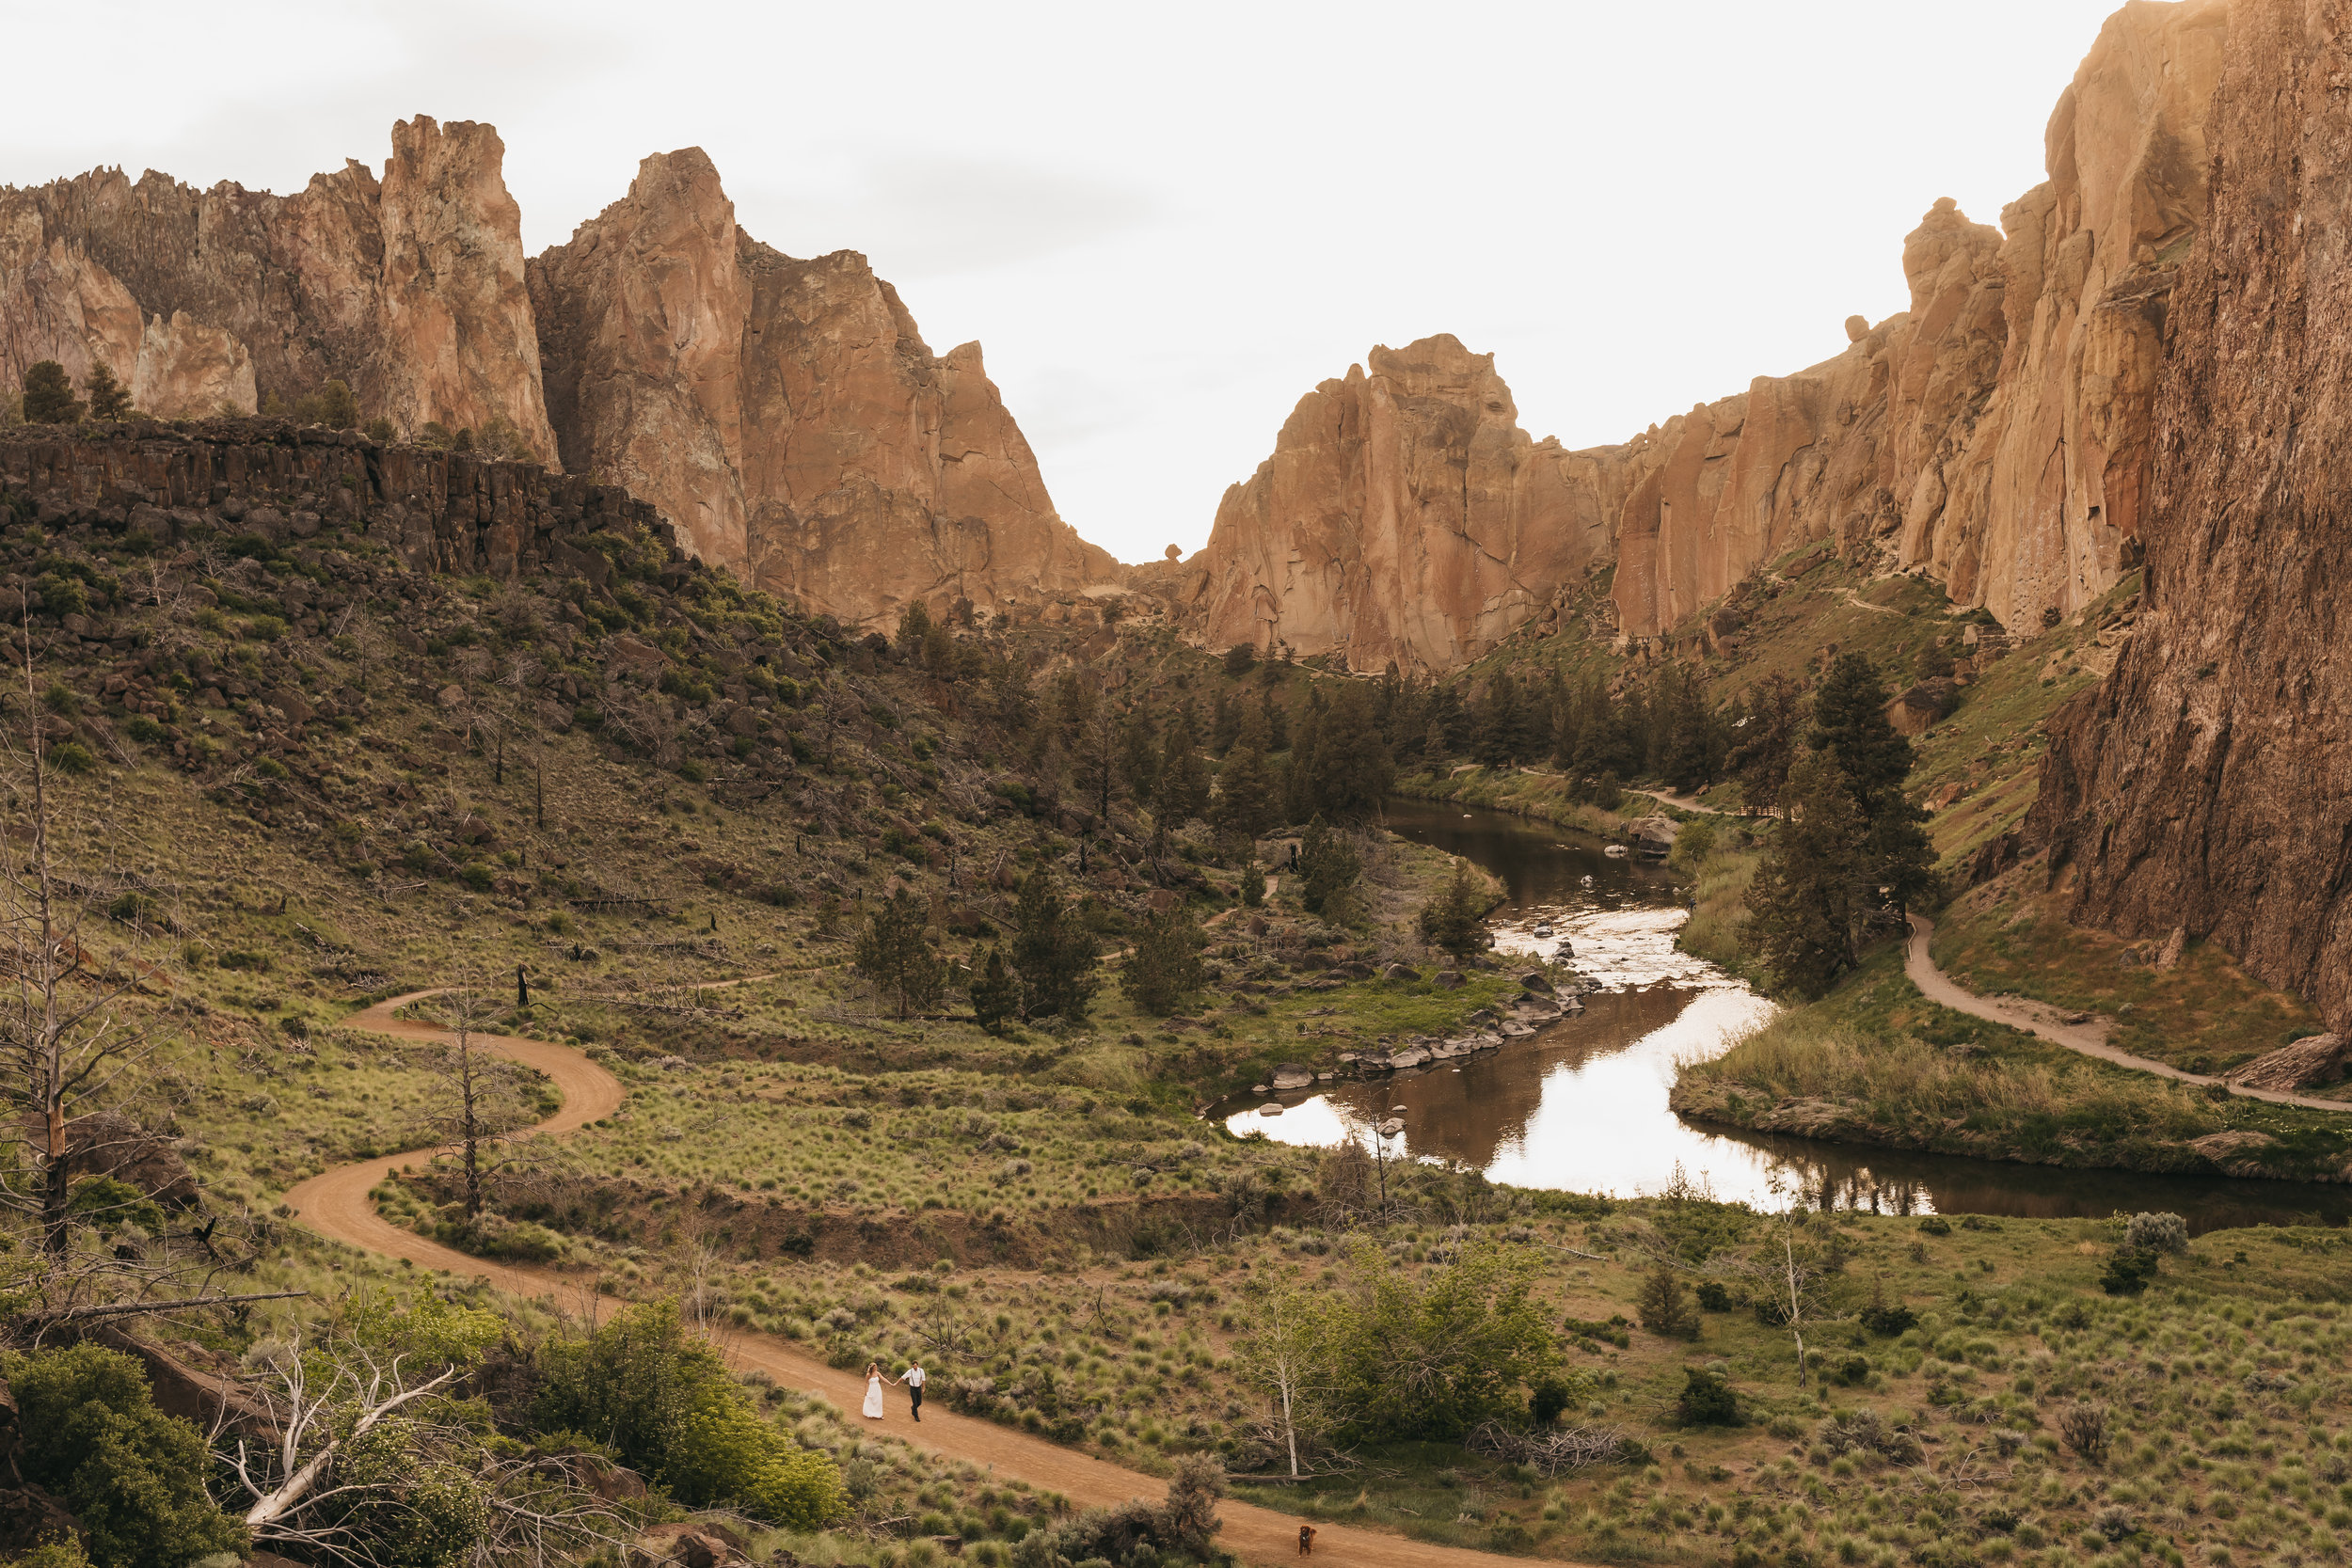 Smith Rock State Park Sunset Photo Session | Between the Pine Adventure Elopement Photography